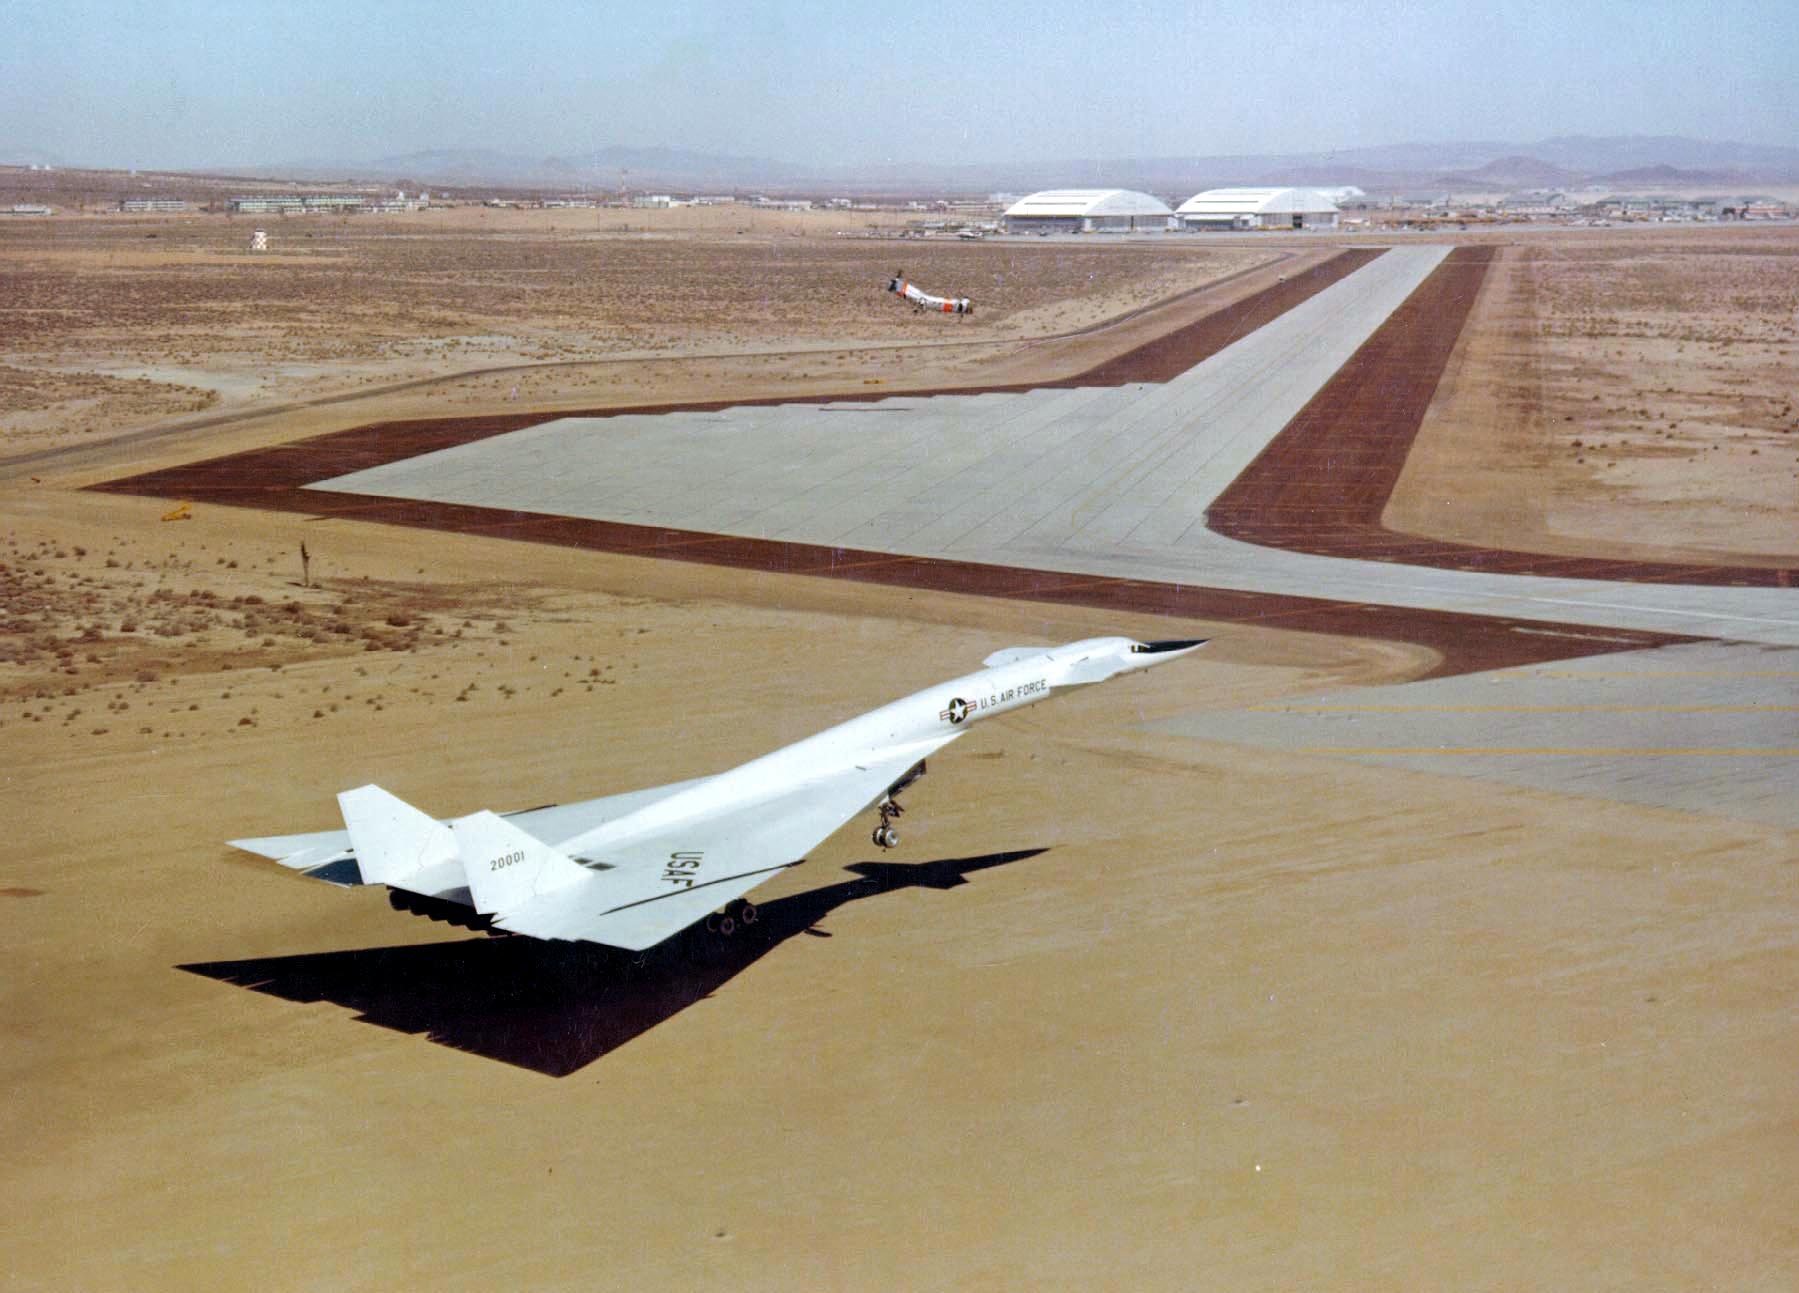 North American Aviation XB-70A Valkyrie 62-0001 lands at Edwards Air Force Base at the end of its first flight, 21 September 1964. (U.S. Air Force)